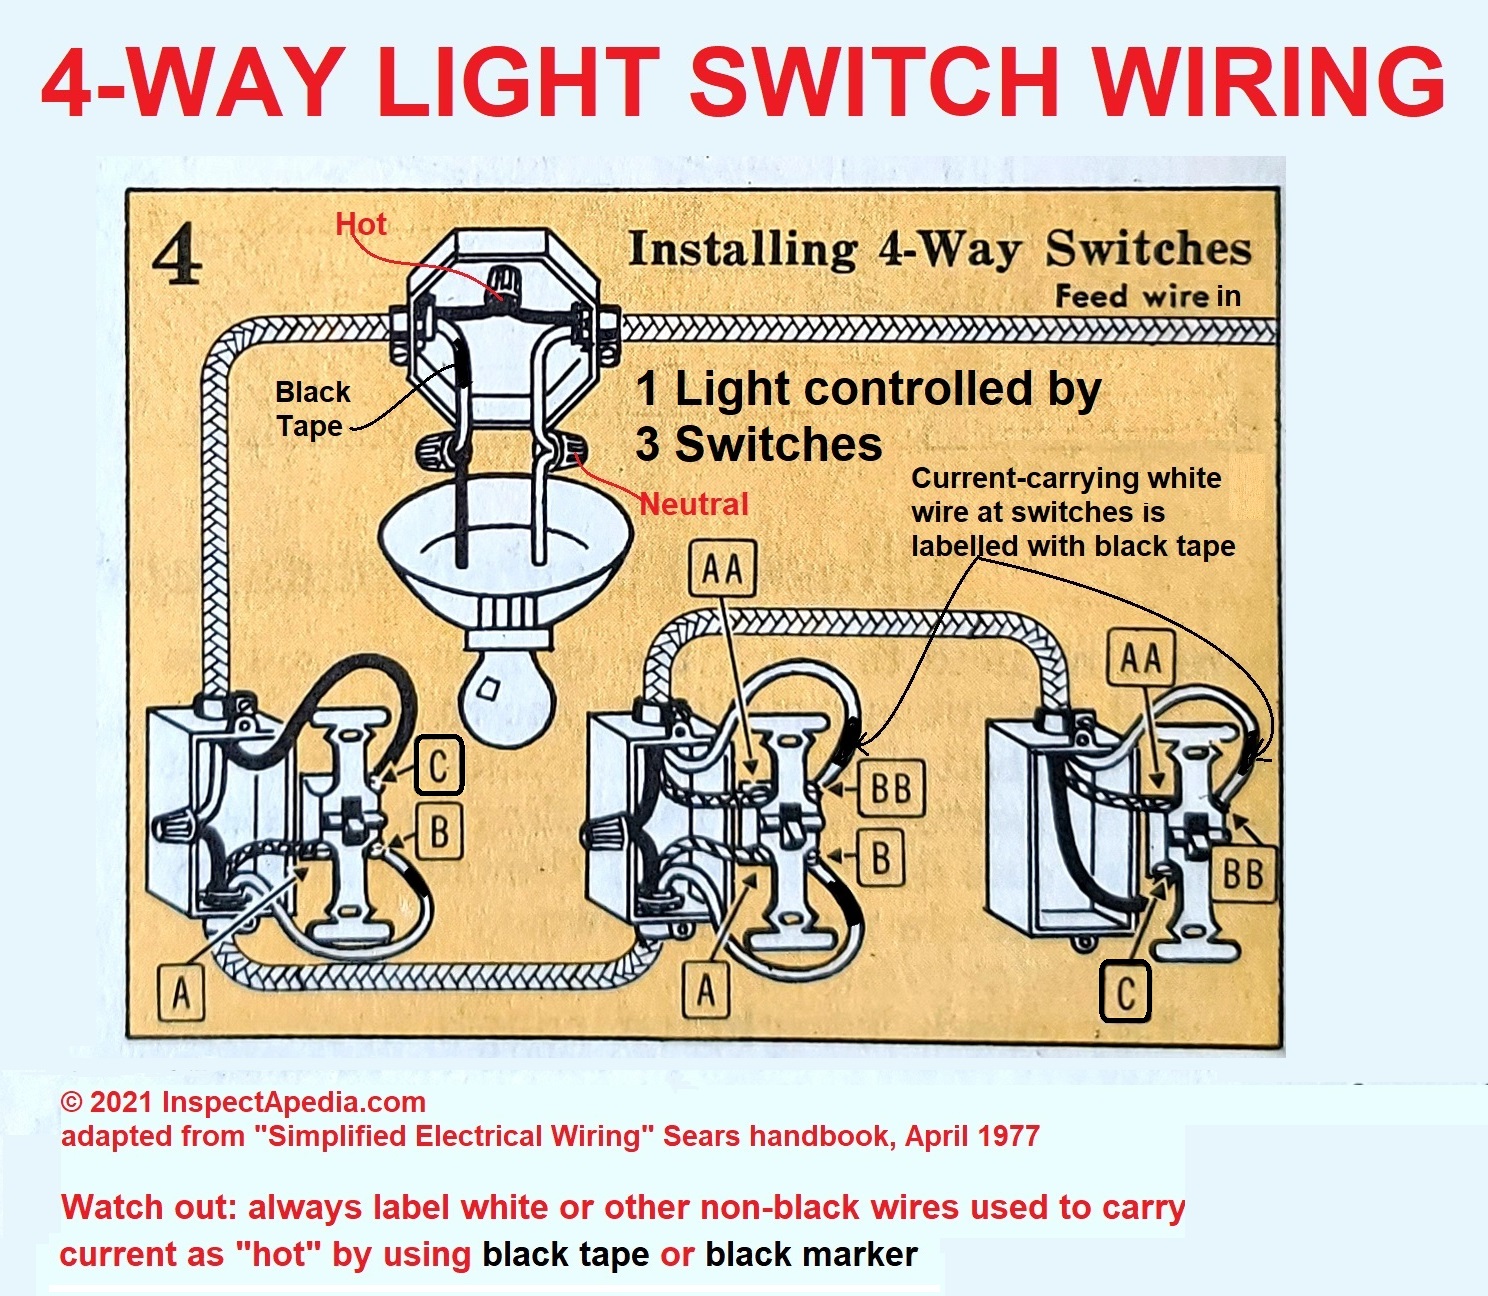 3 switches wiring together light Swap out